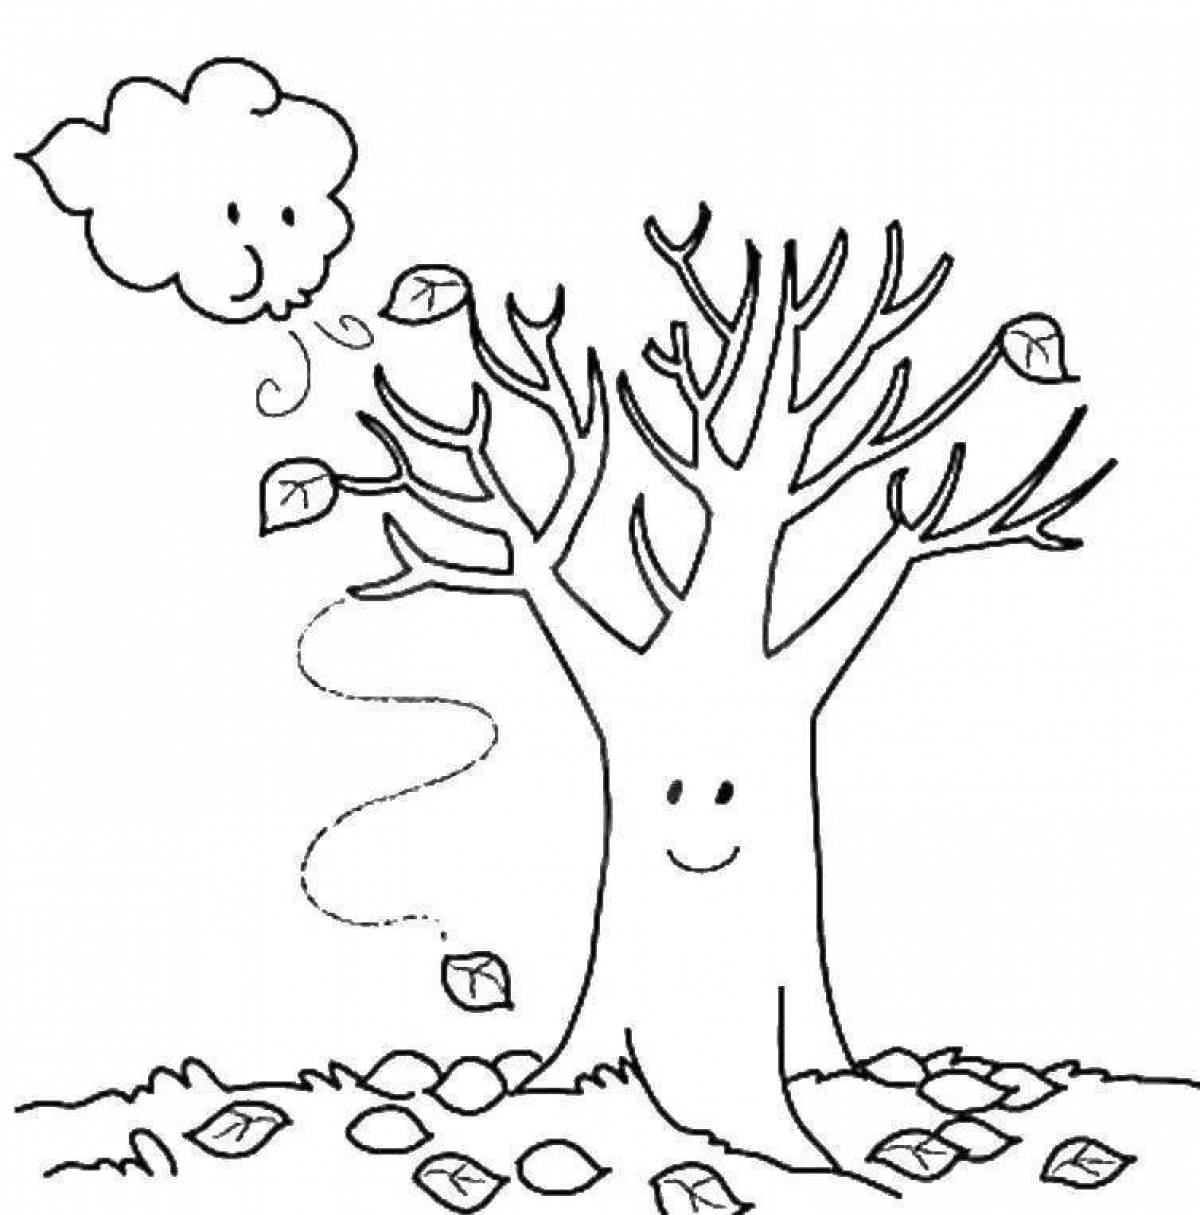 Coloring tree trunk with rich colors for kids